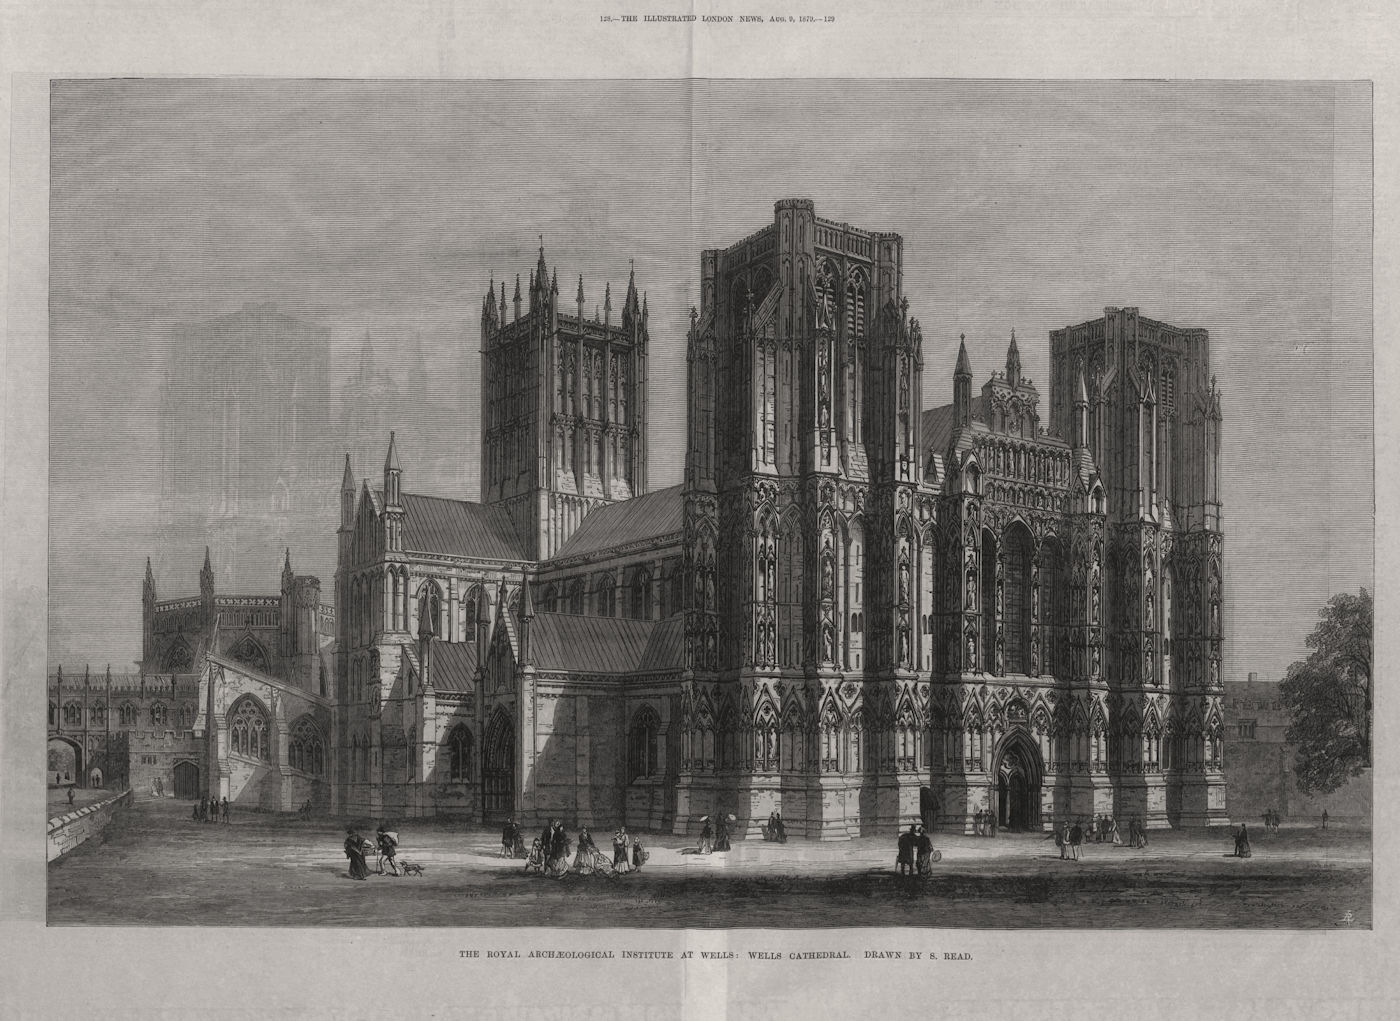 The Royal Archaeological Institute at Wells: Wells Cathedral. Somerset 1879